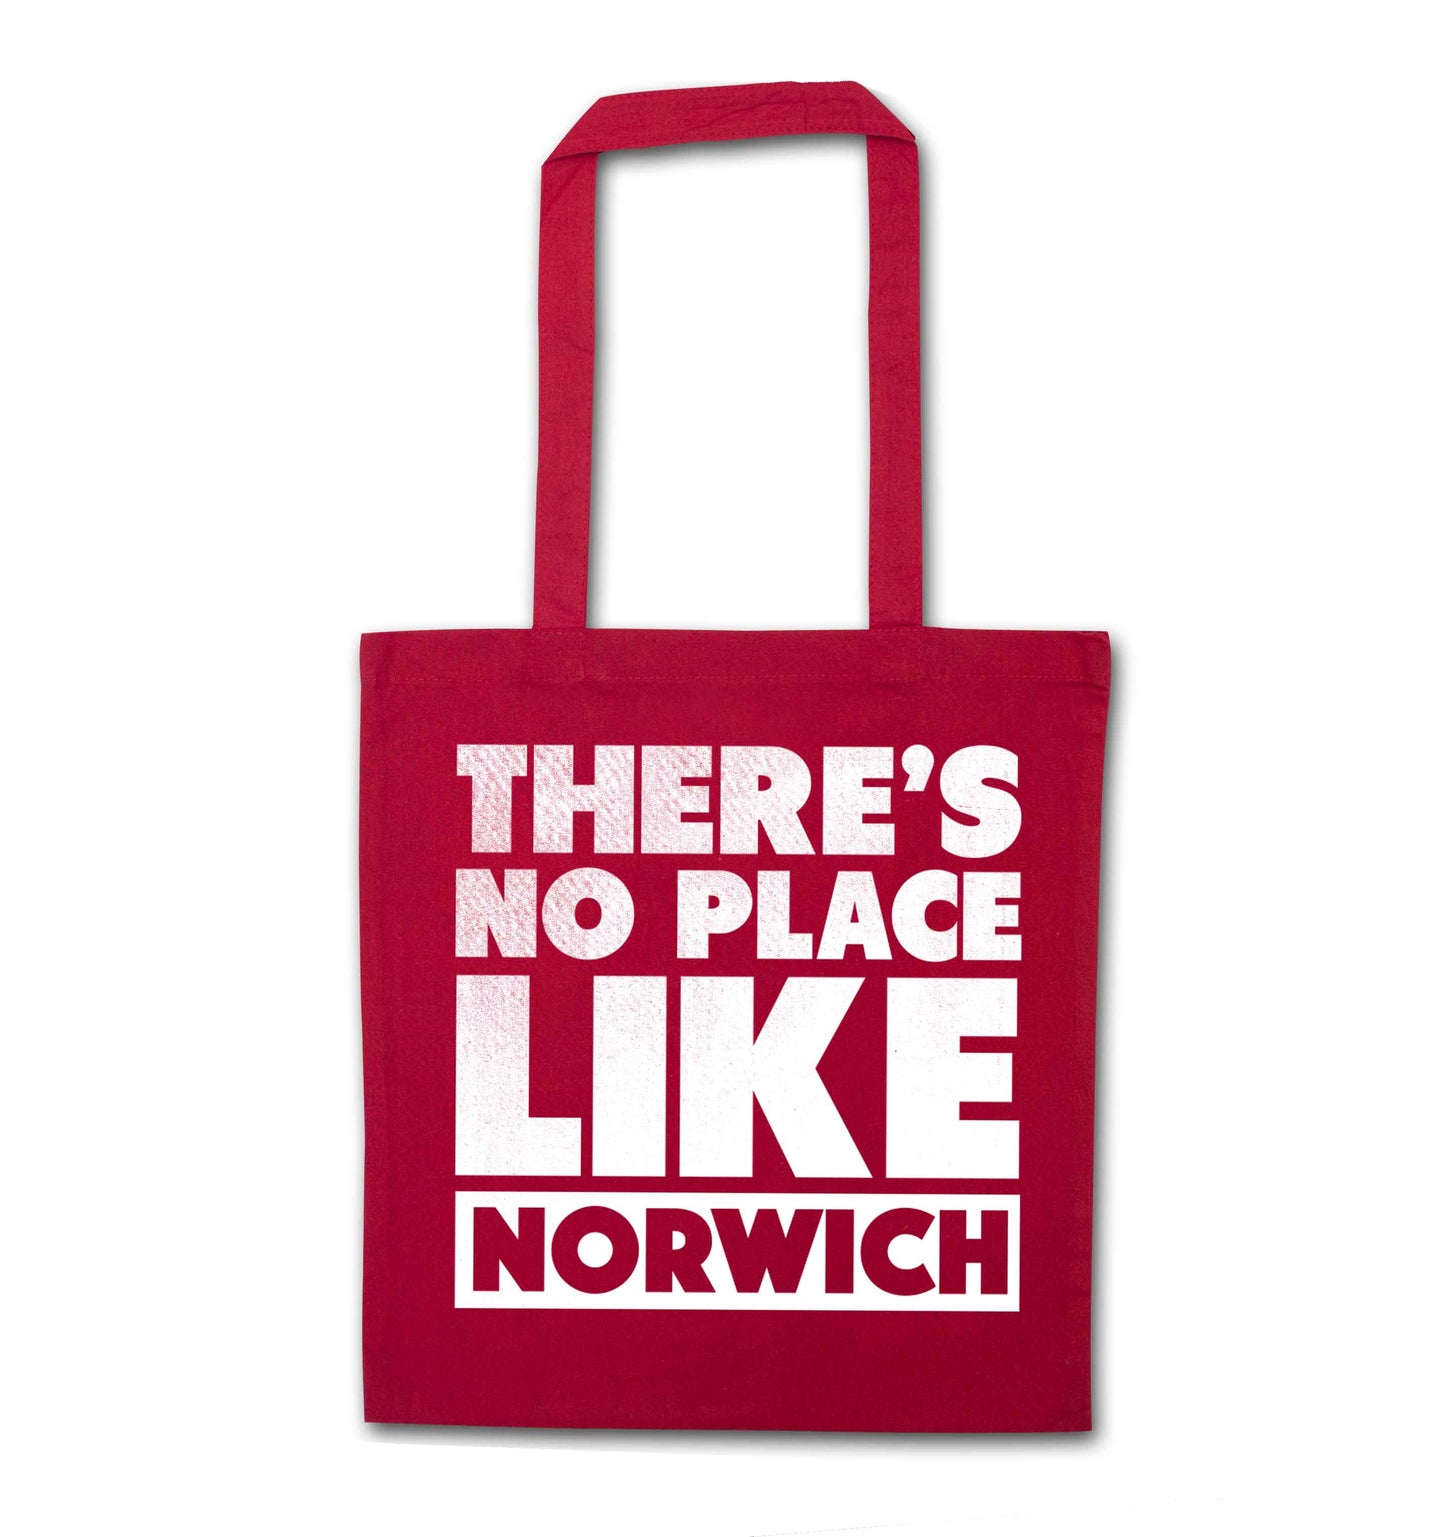 There's no place like Norwich red tote bag